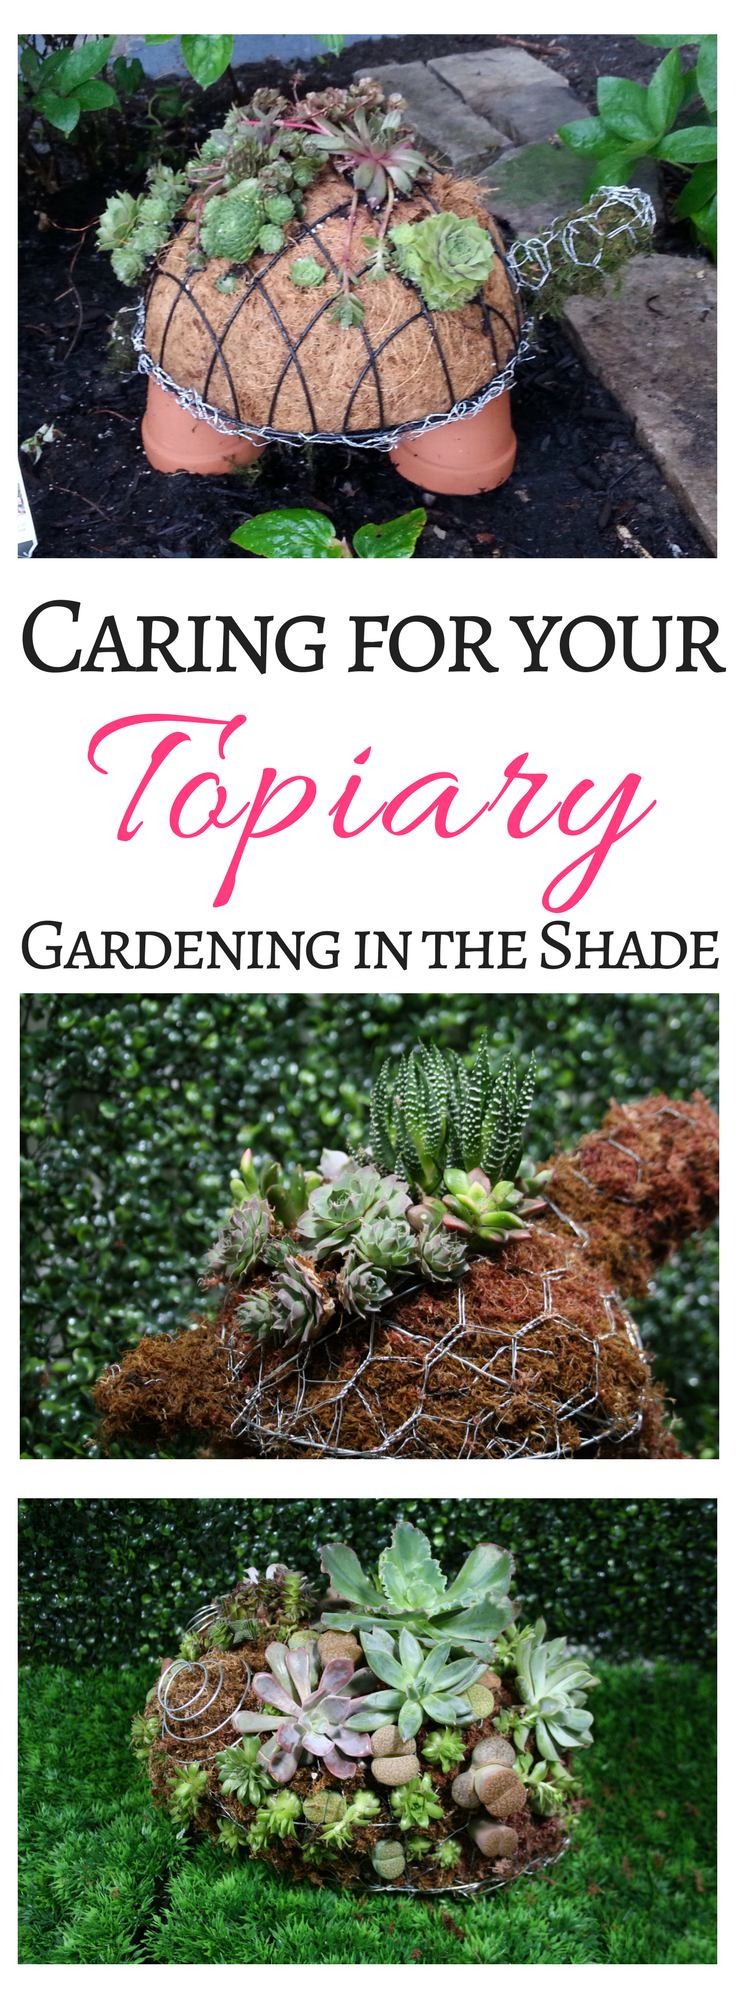 Some tips to help you care for your topiary once it's planted!